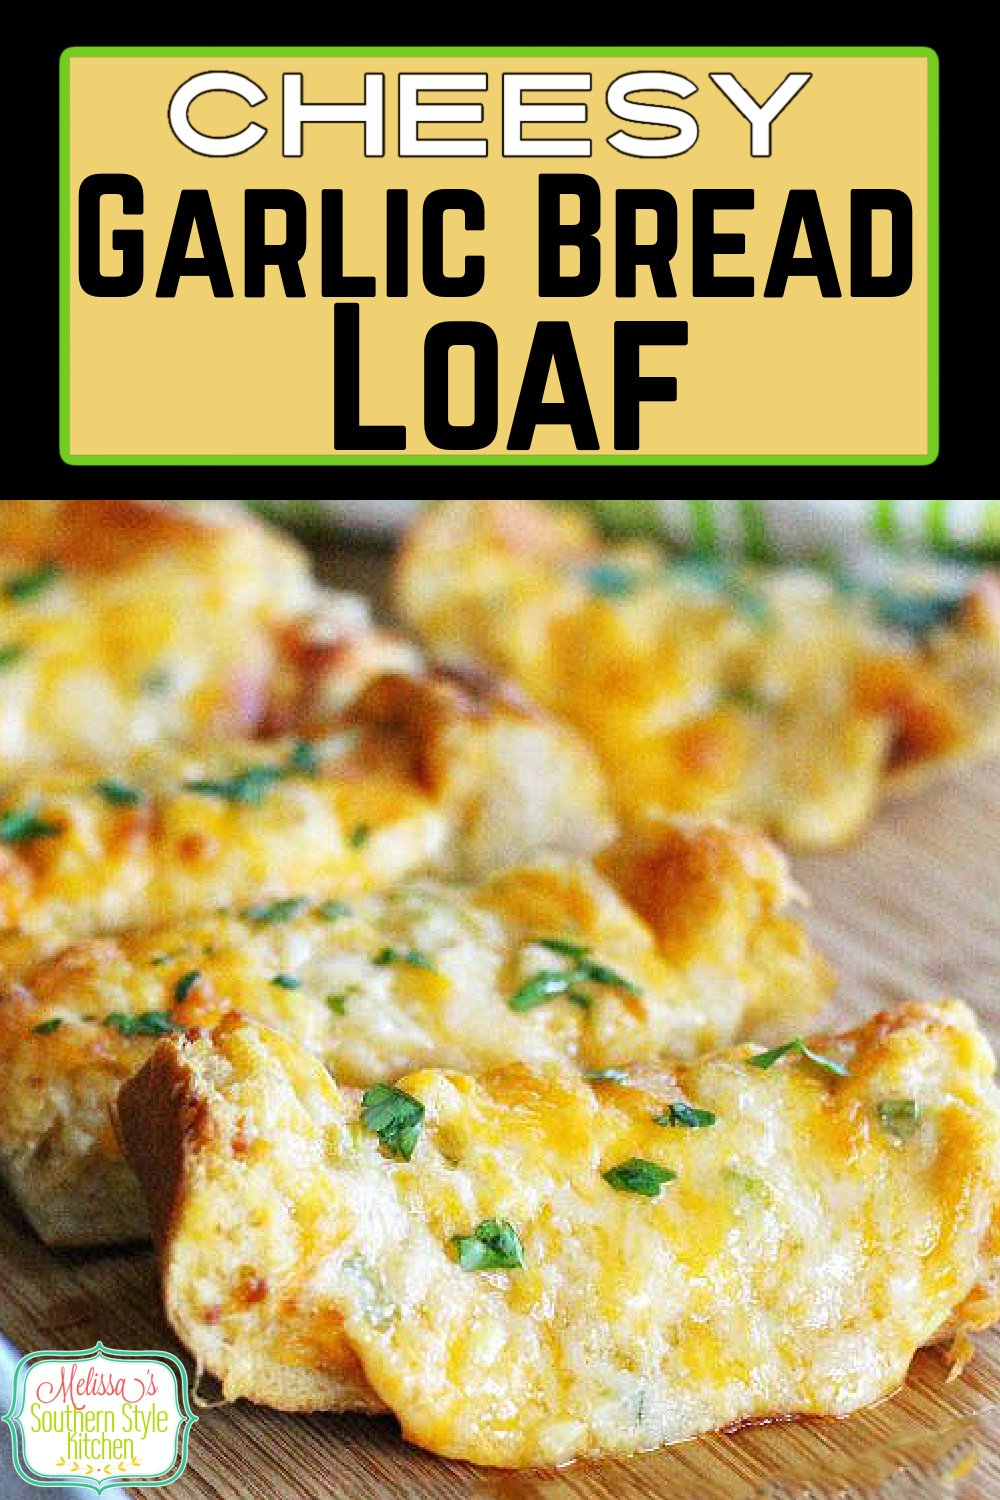 Ooey gooey delicious Cheesy Garlic Bread Loaf can be served as an appetizer or a side dish #galicbread #cheesebread #breadrecipes #appetizers #sidedishes #cheese #garlicbread #southernfood #southernrecipes via @melissasssk